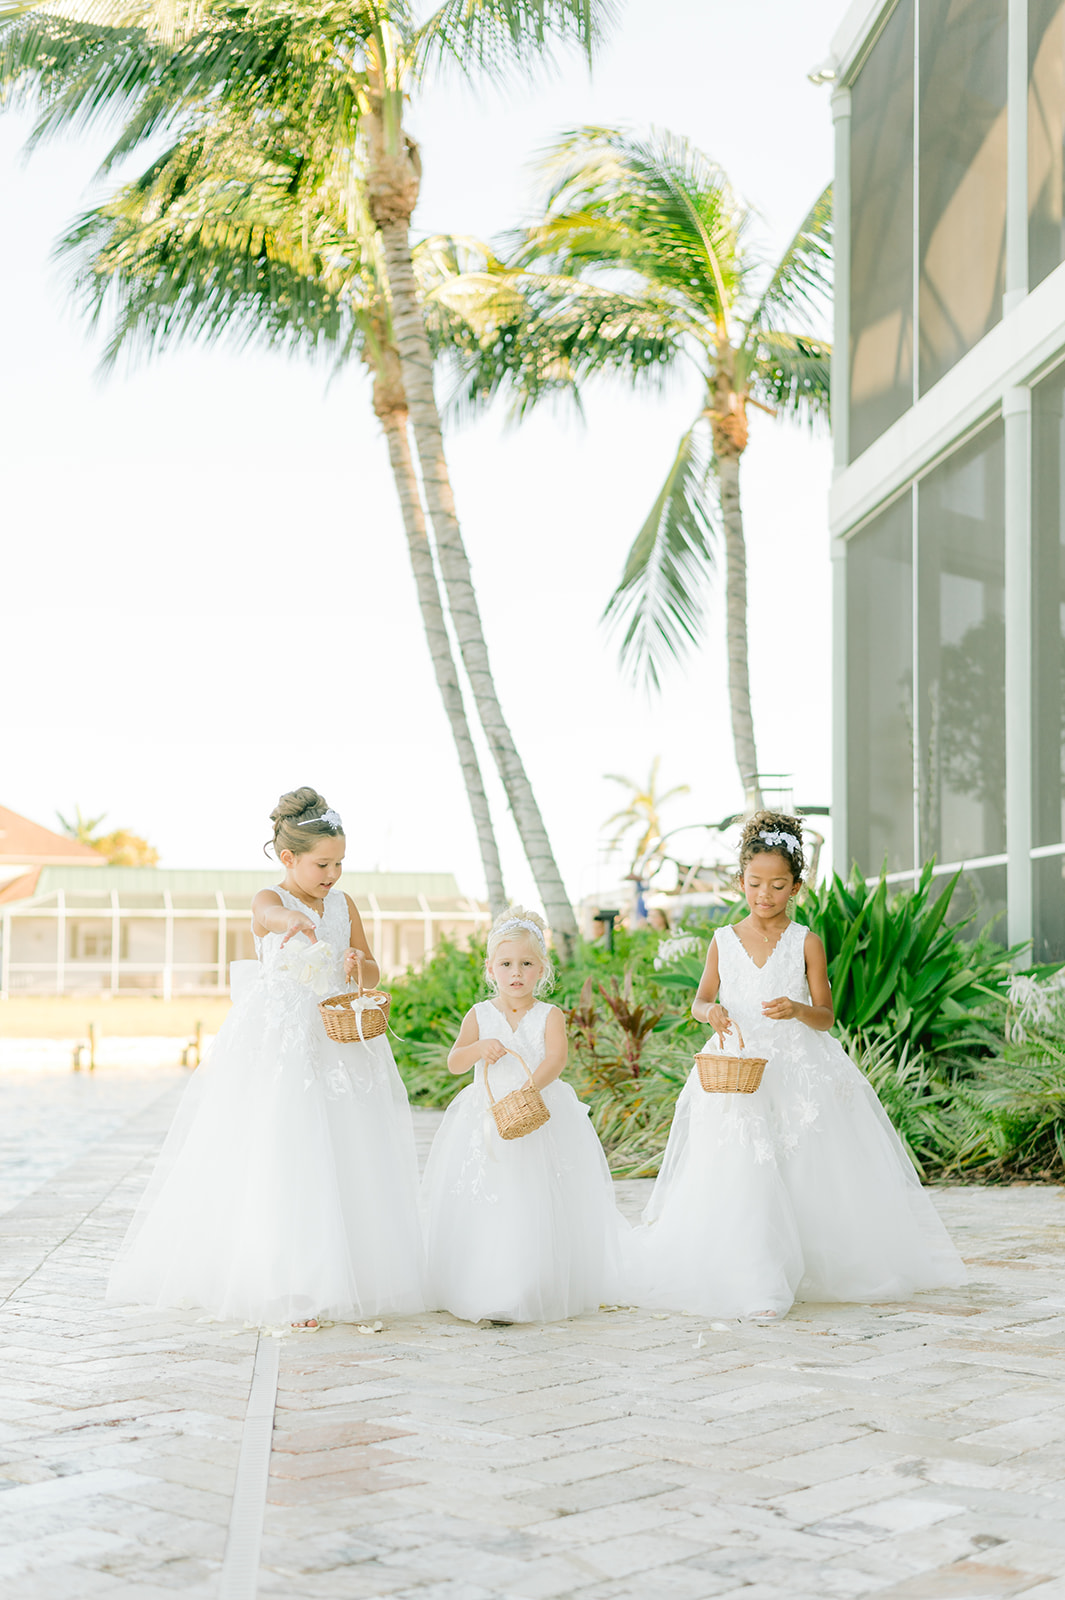 Marco Island Beach Wedding Photography with a Creative Touch - Unforgettable Memories
